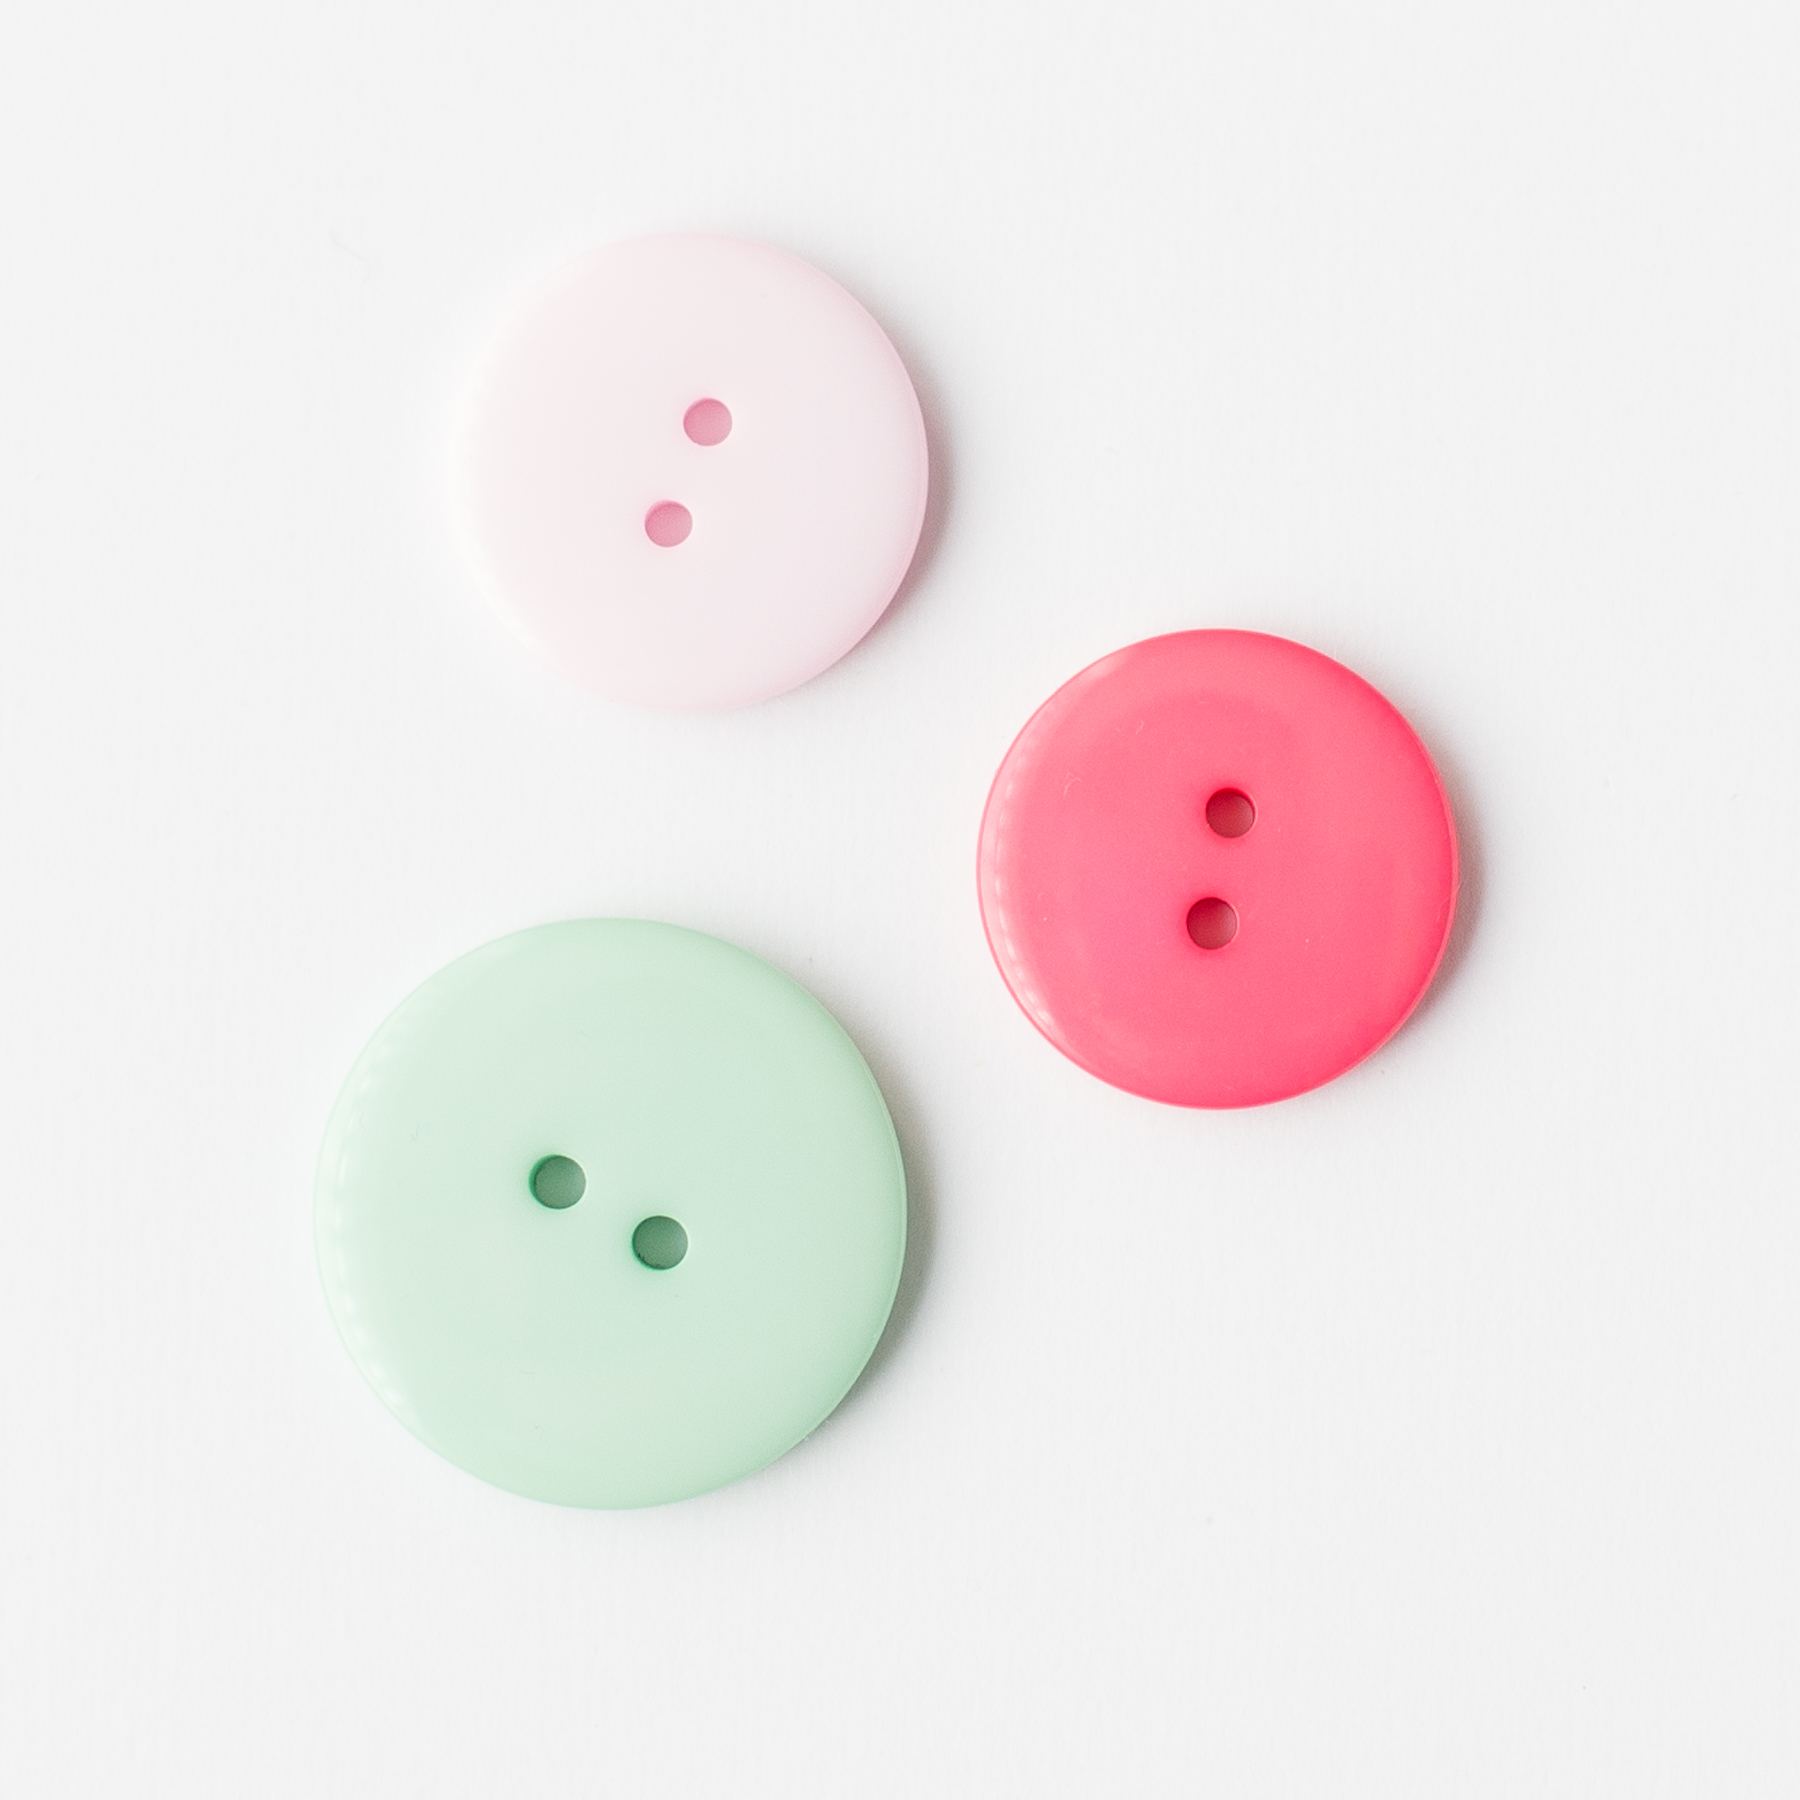  - Light green plastic button | Large | 28 mm | Round plastic button - 28/03/2018